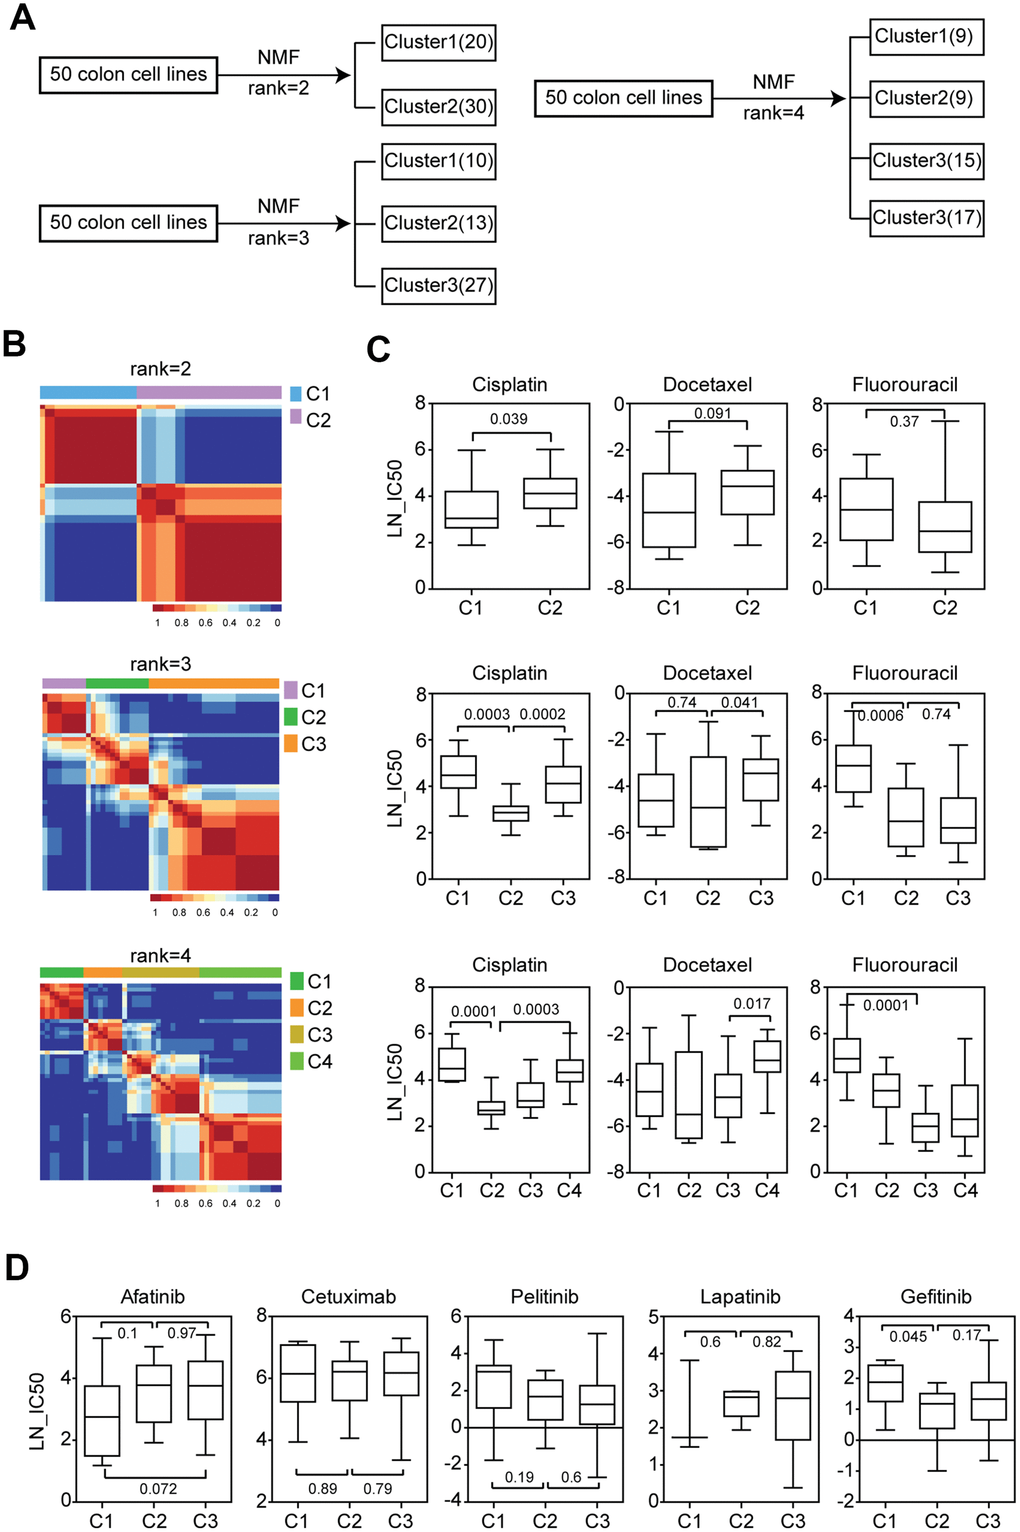 Chemo-sensitivity is different in the three sub-clusters of colon cancer cell lines classified by NMF. (A) Colon cancer cell lines were divided into two, three or four sub-clusters based on the gene expression profiling using NMF. Number of colon cancer cell lines in each sub-cluster was demonstrated. (B) Consensus maps showed the correlation profilings of colon cancer cell lines from two consensuses, three consensuses or four consensuses. (C) Box plots showed the LN-IC50 of chemotherapy drugs cisplatin, docetaxel and 5-Fluorouracil in each sub-cluster derived from two consensuses, three consensuses or four consensuses. (D) Box plots showed the LN-IC50 of EGFR inhibitors in each colon cancer sub-cluster derived from three consensuses.